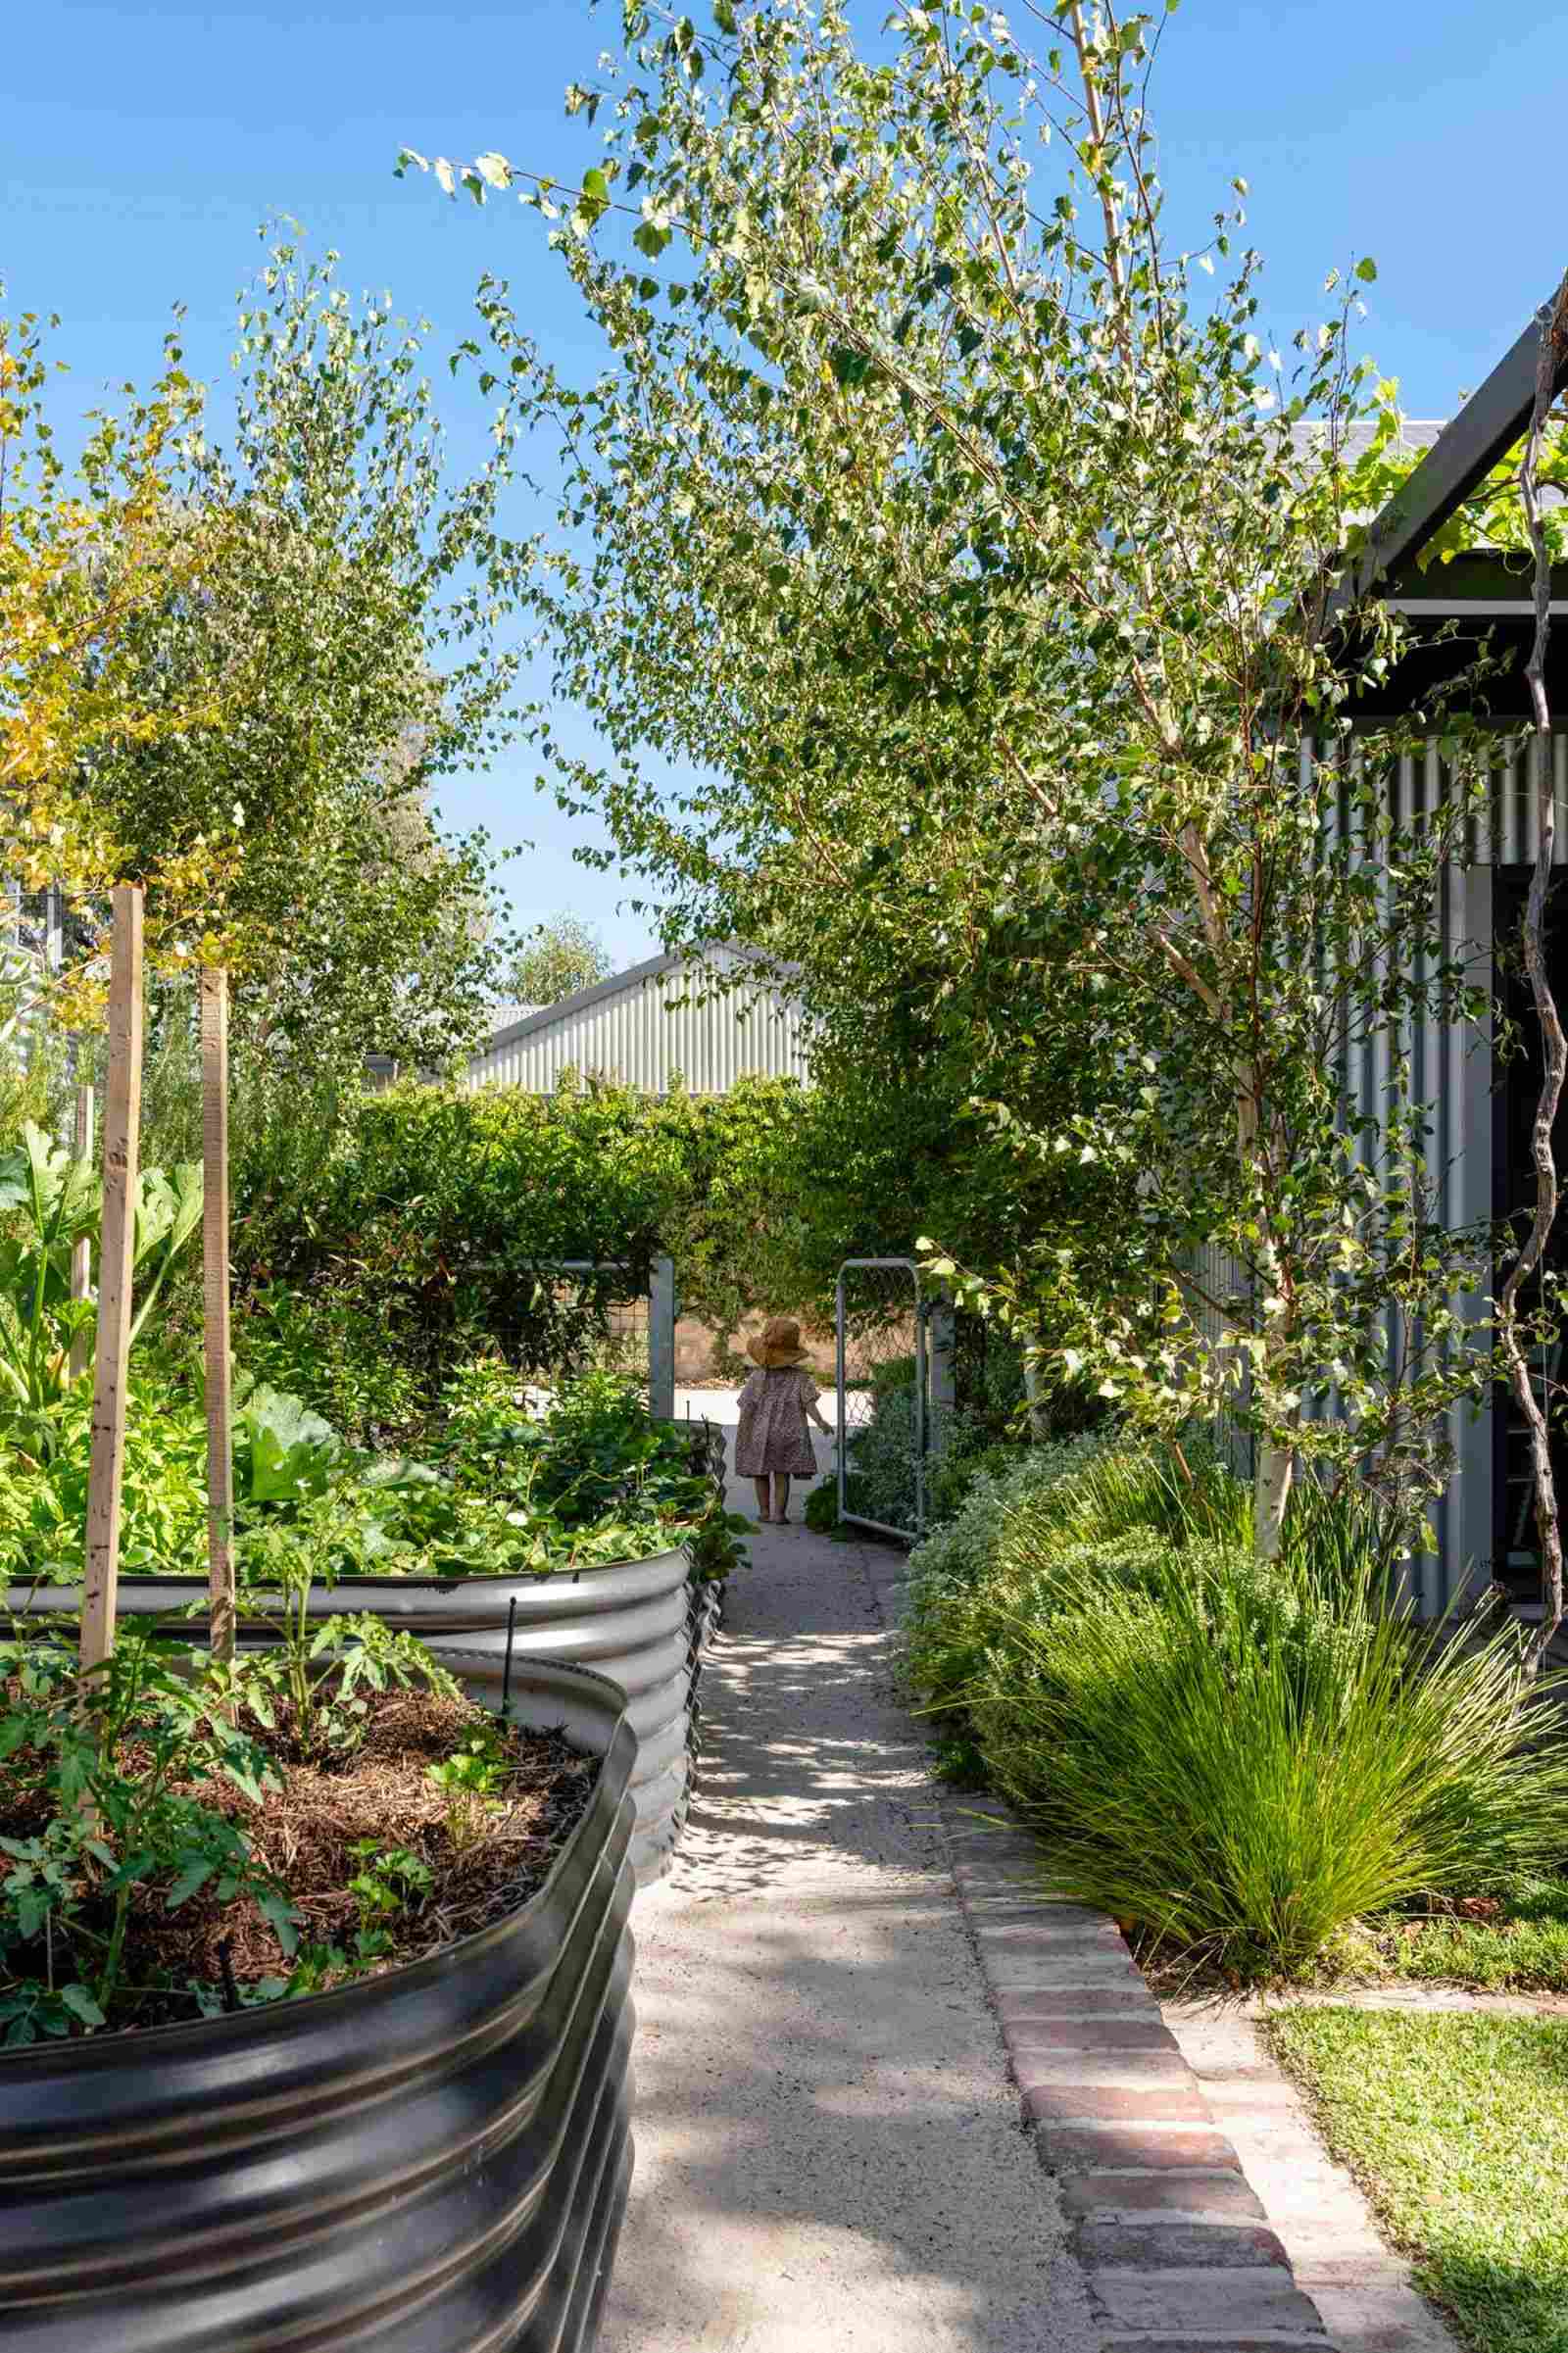 Valley House by See Design Studio showing garden design with vegetable gardens